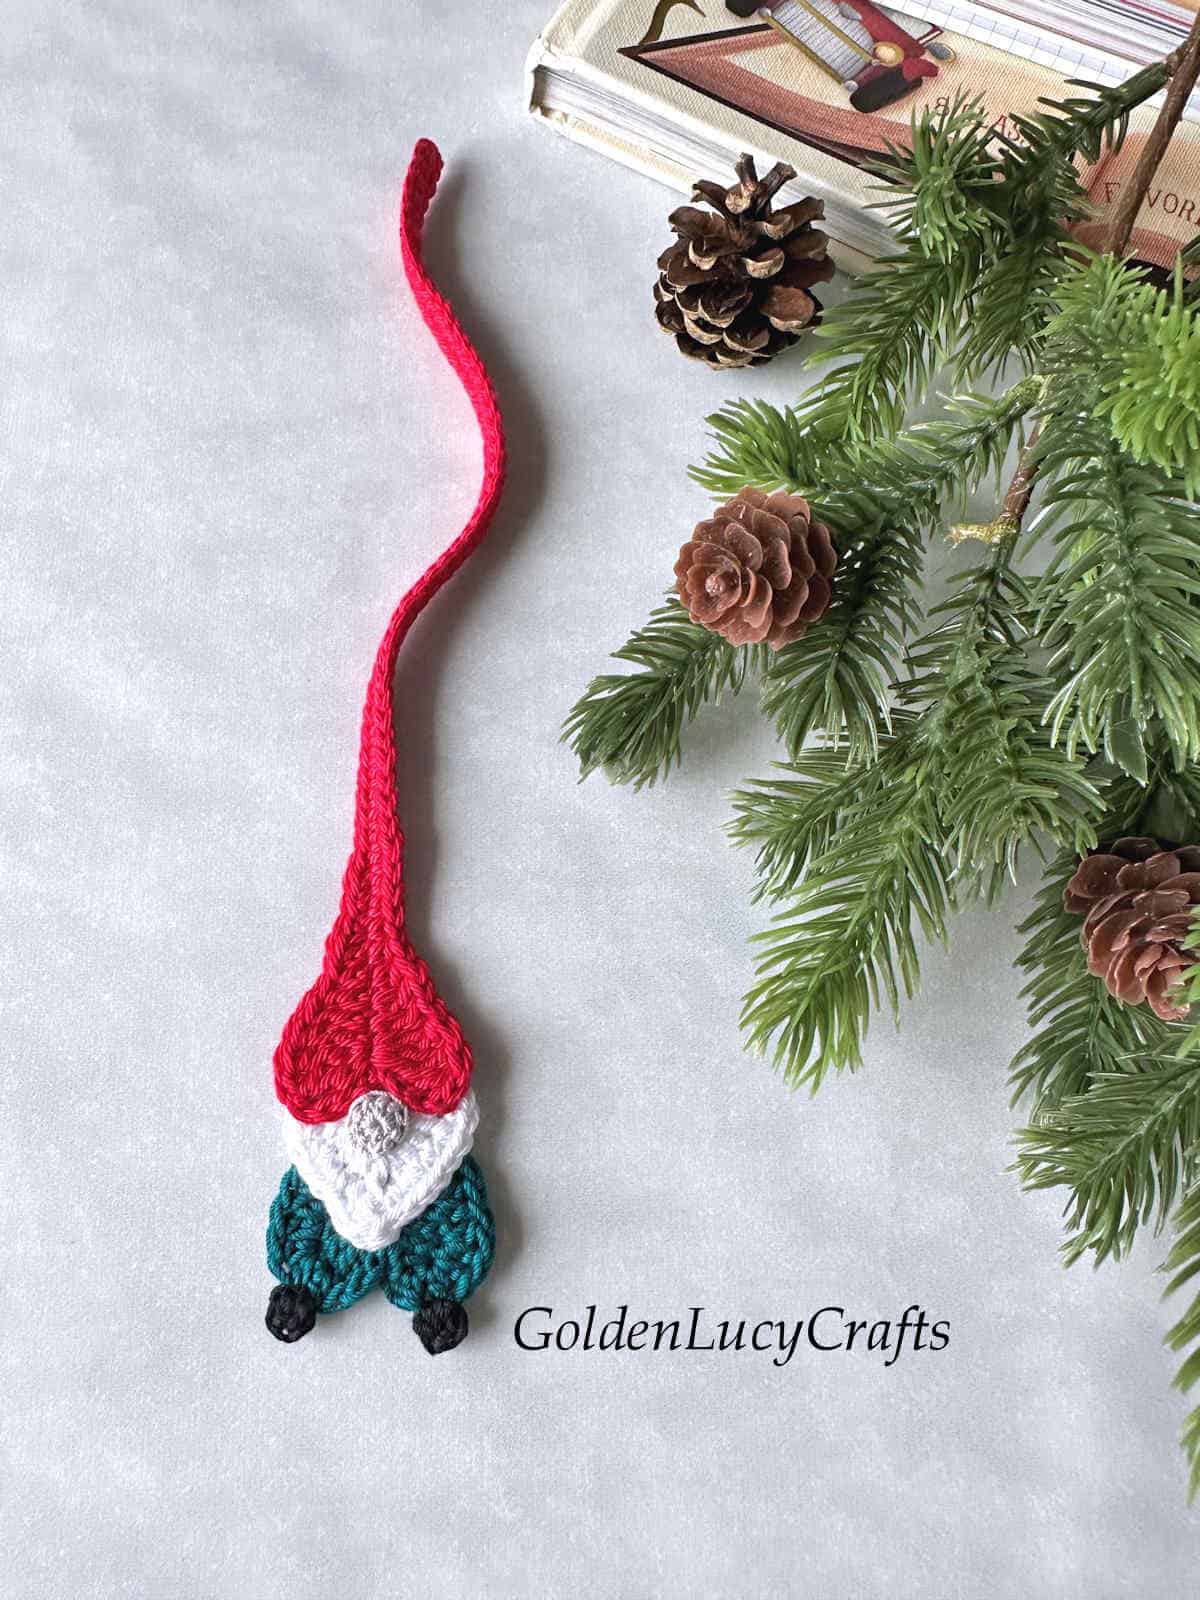 Crochet gnome made as bookmark next to the Christmas tree branch.